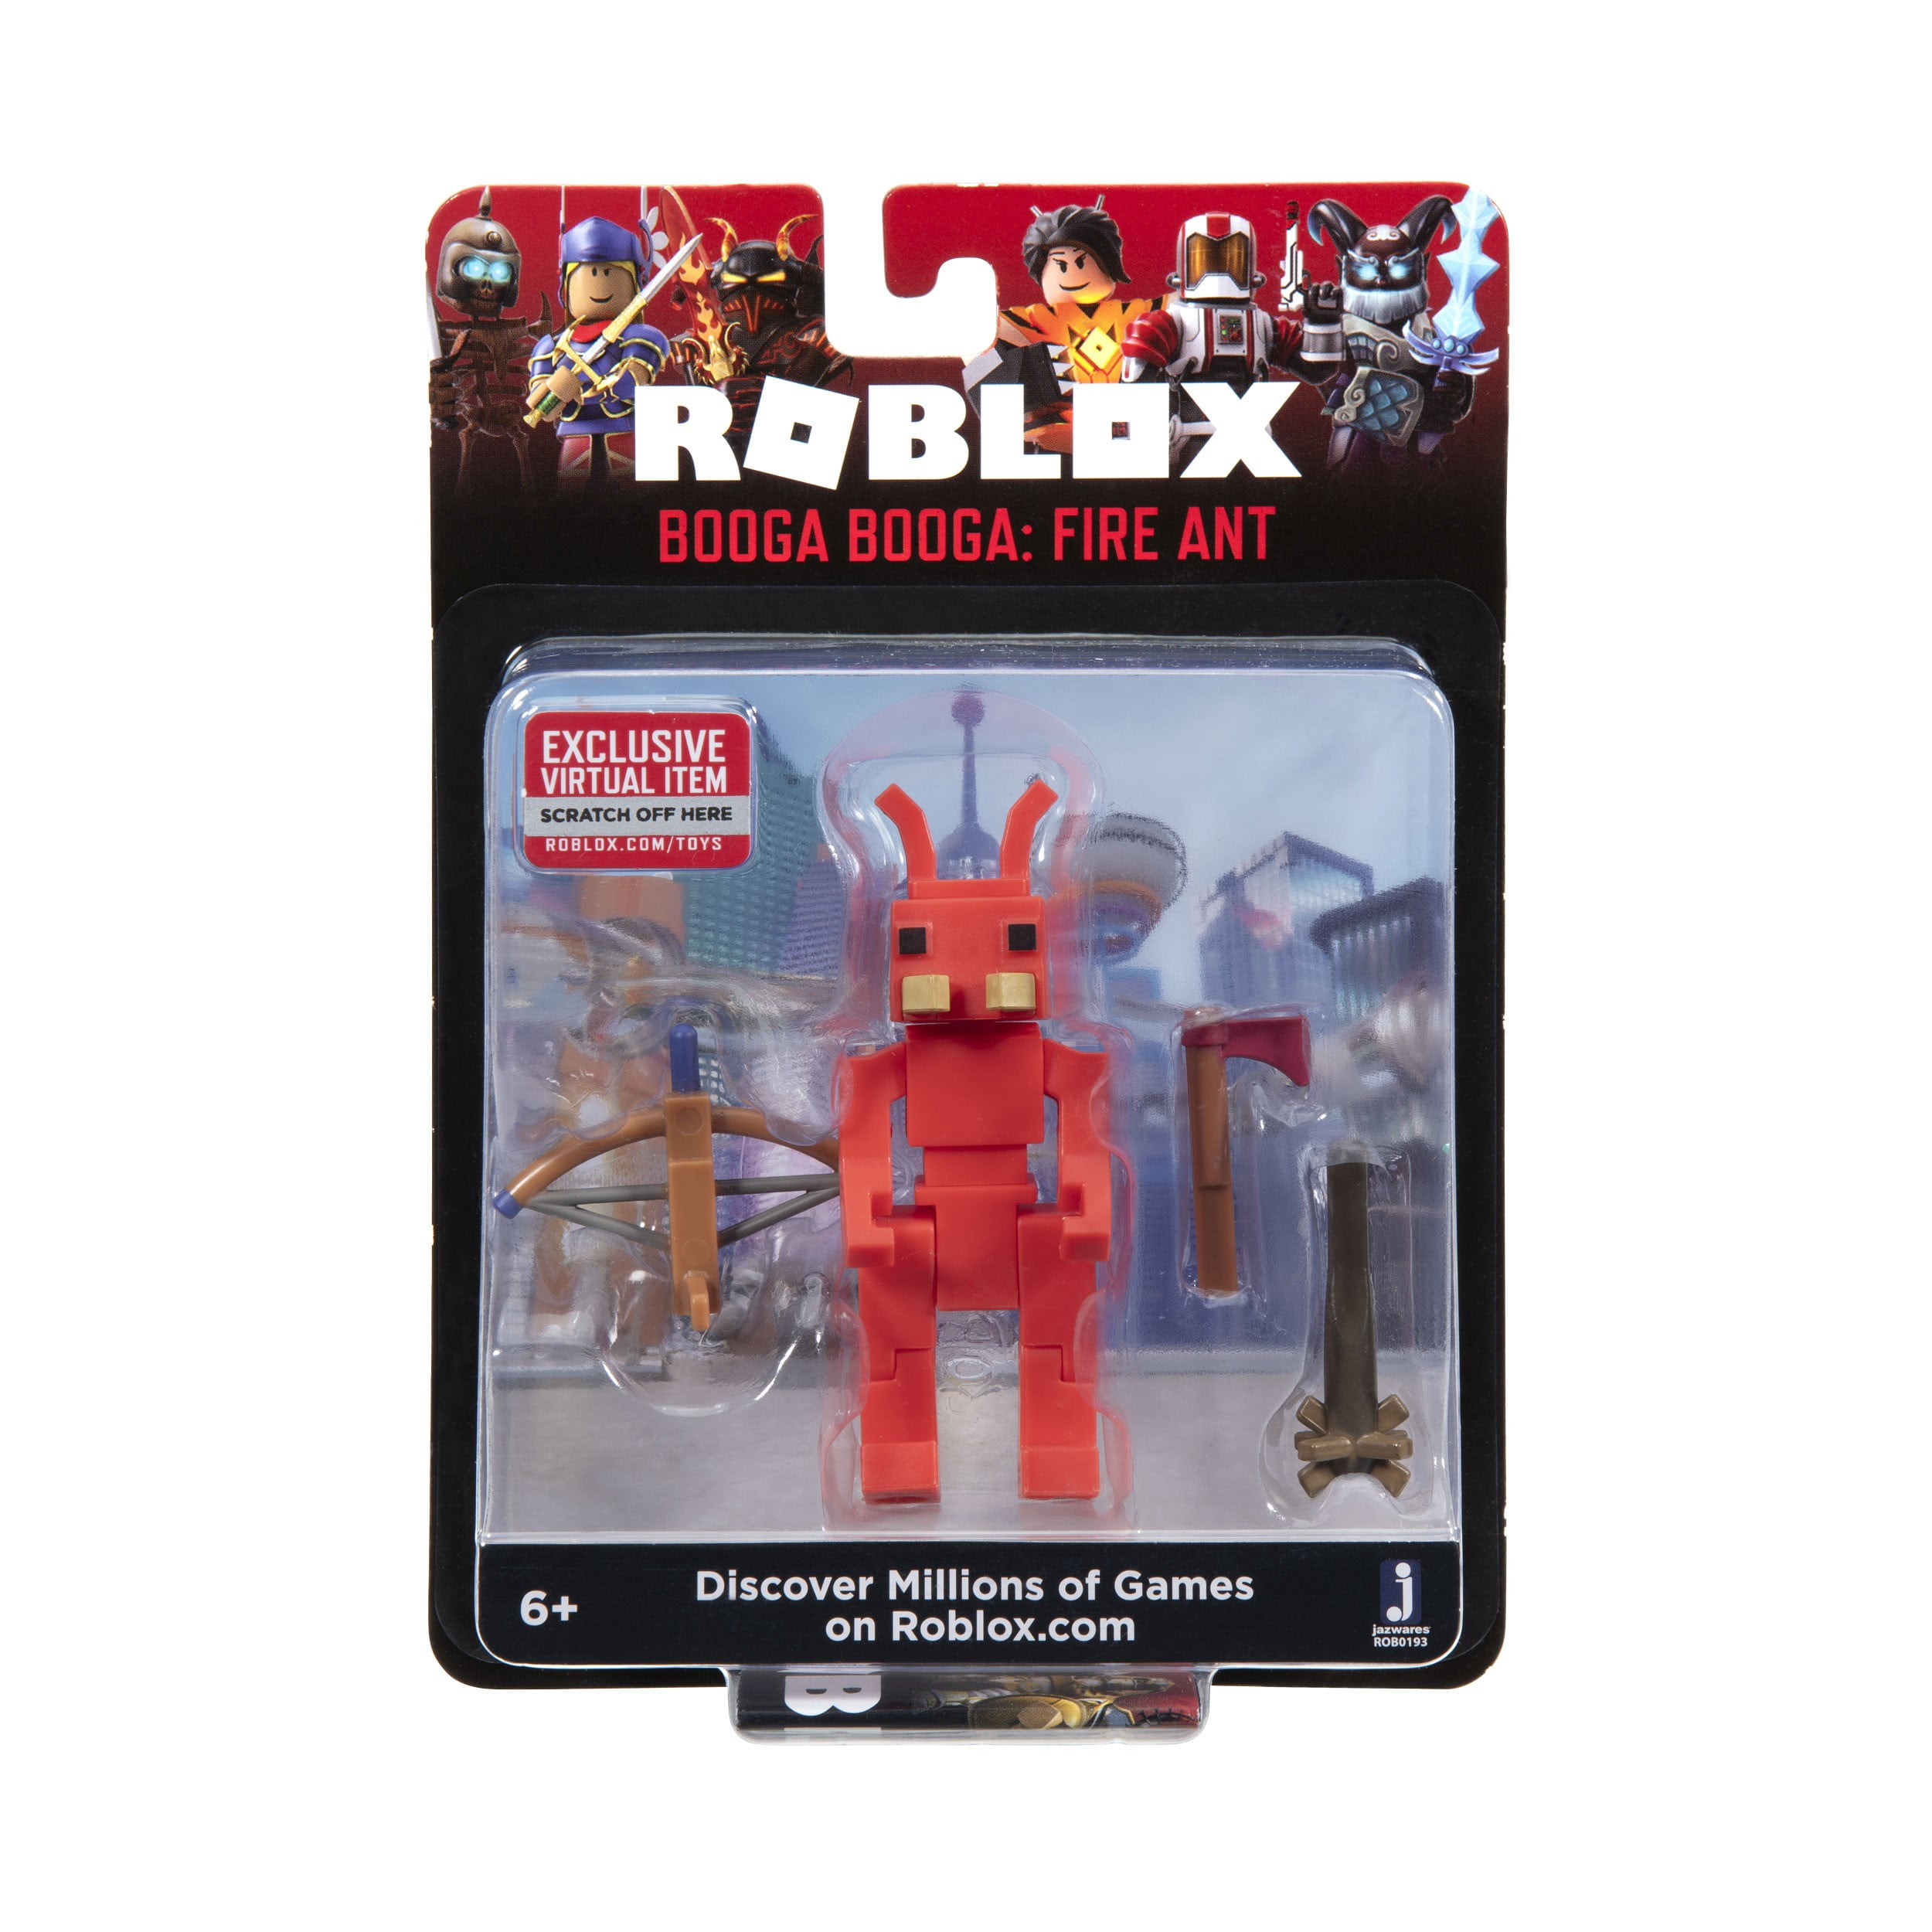 Roblox Booga Booga Level Hack Robux Promo Codes 2019 1 5 2019 - red fire ant shirt roblox